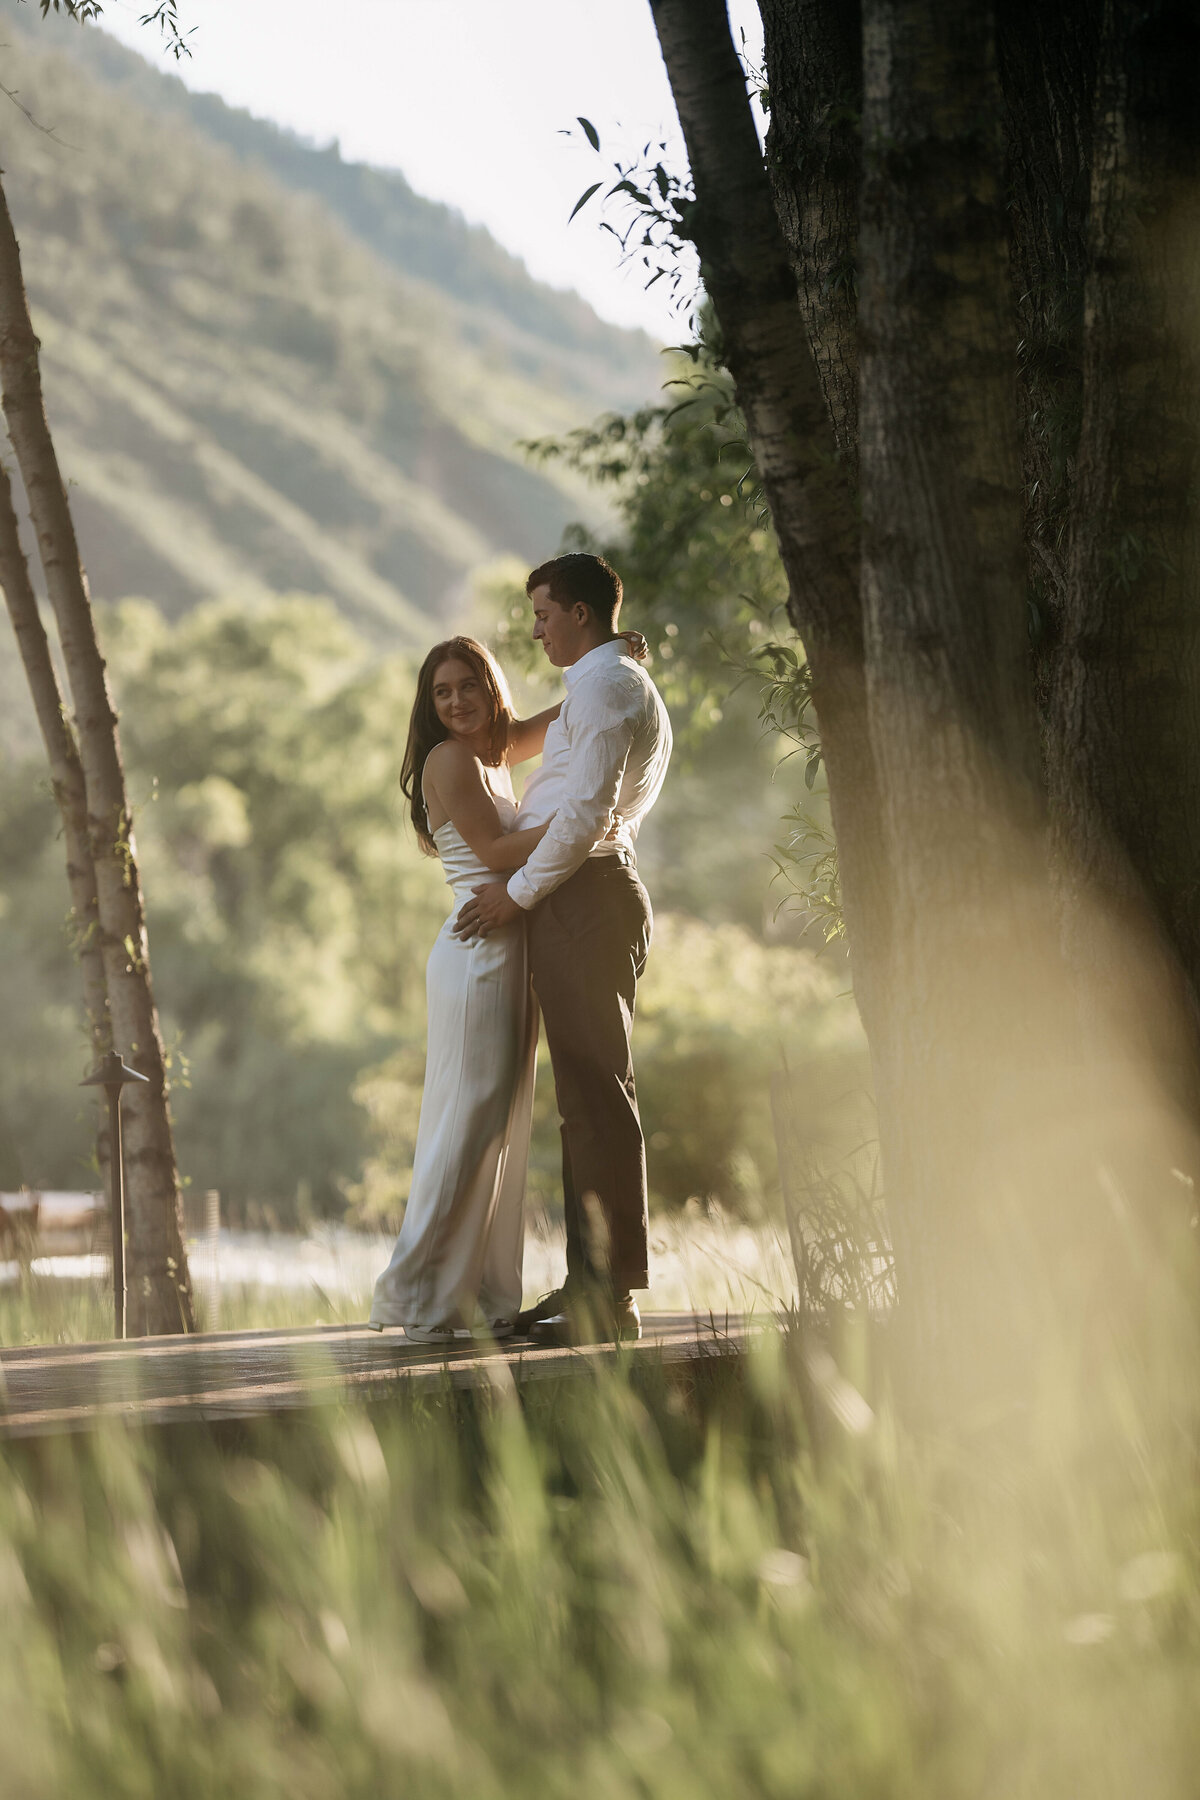 Golden hour photos with the bride and groom, as the sun caught the green grass they pose for a photo,